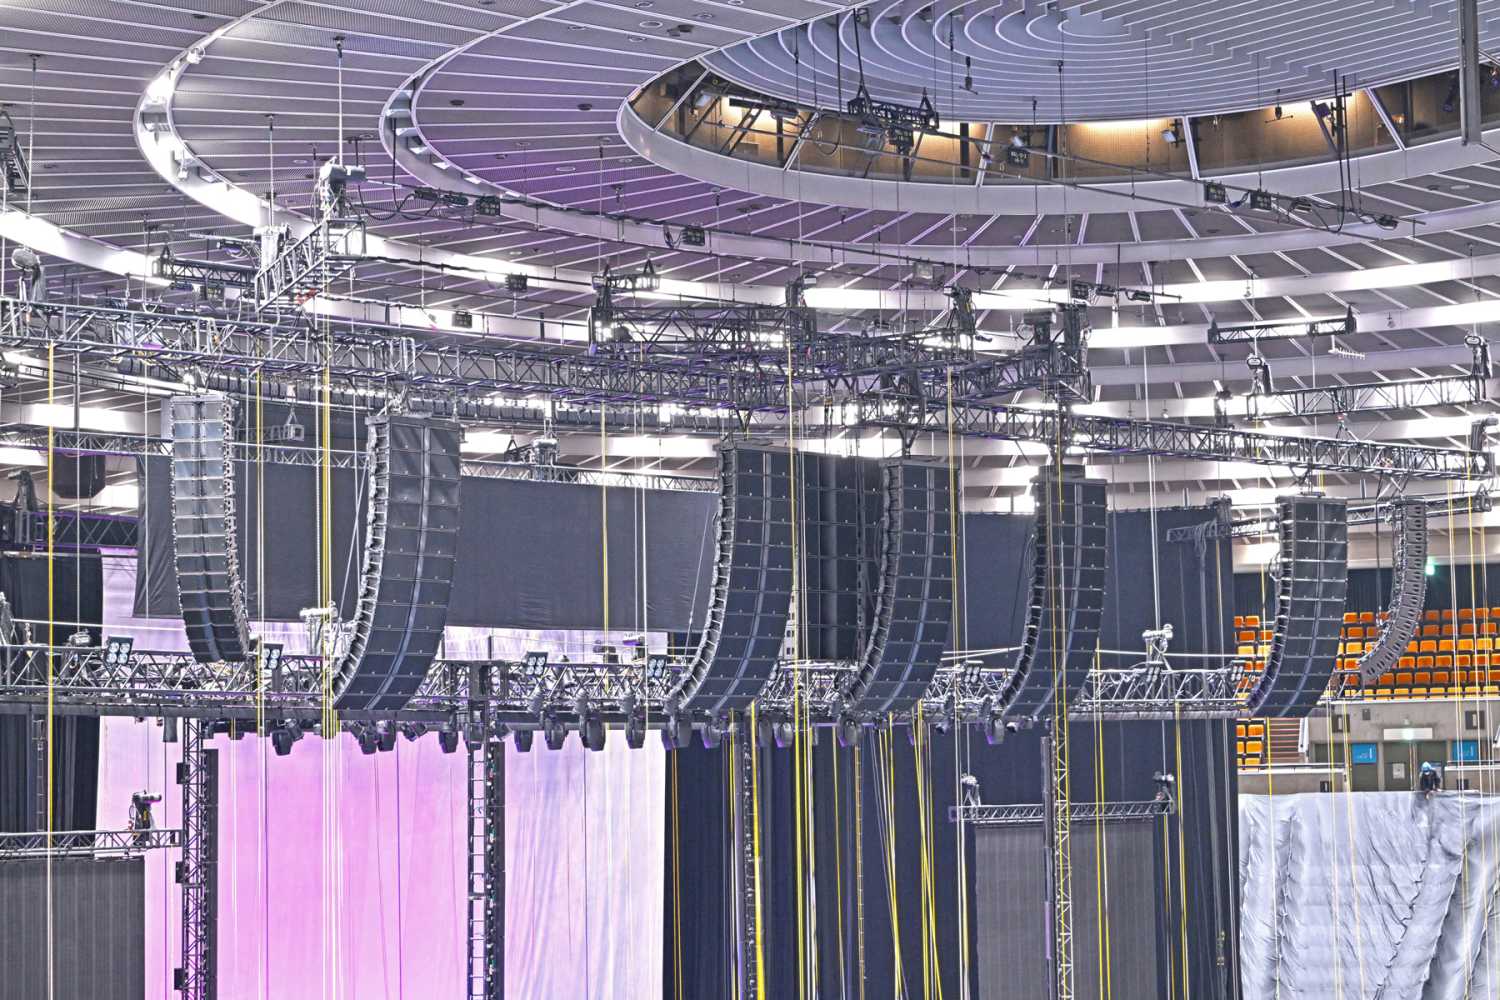 The final L-ISA configuration consisted of a main Scene System of five hangs of 12 L-Acoustics K2 each